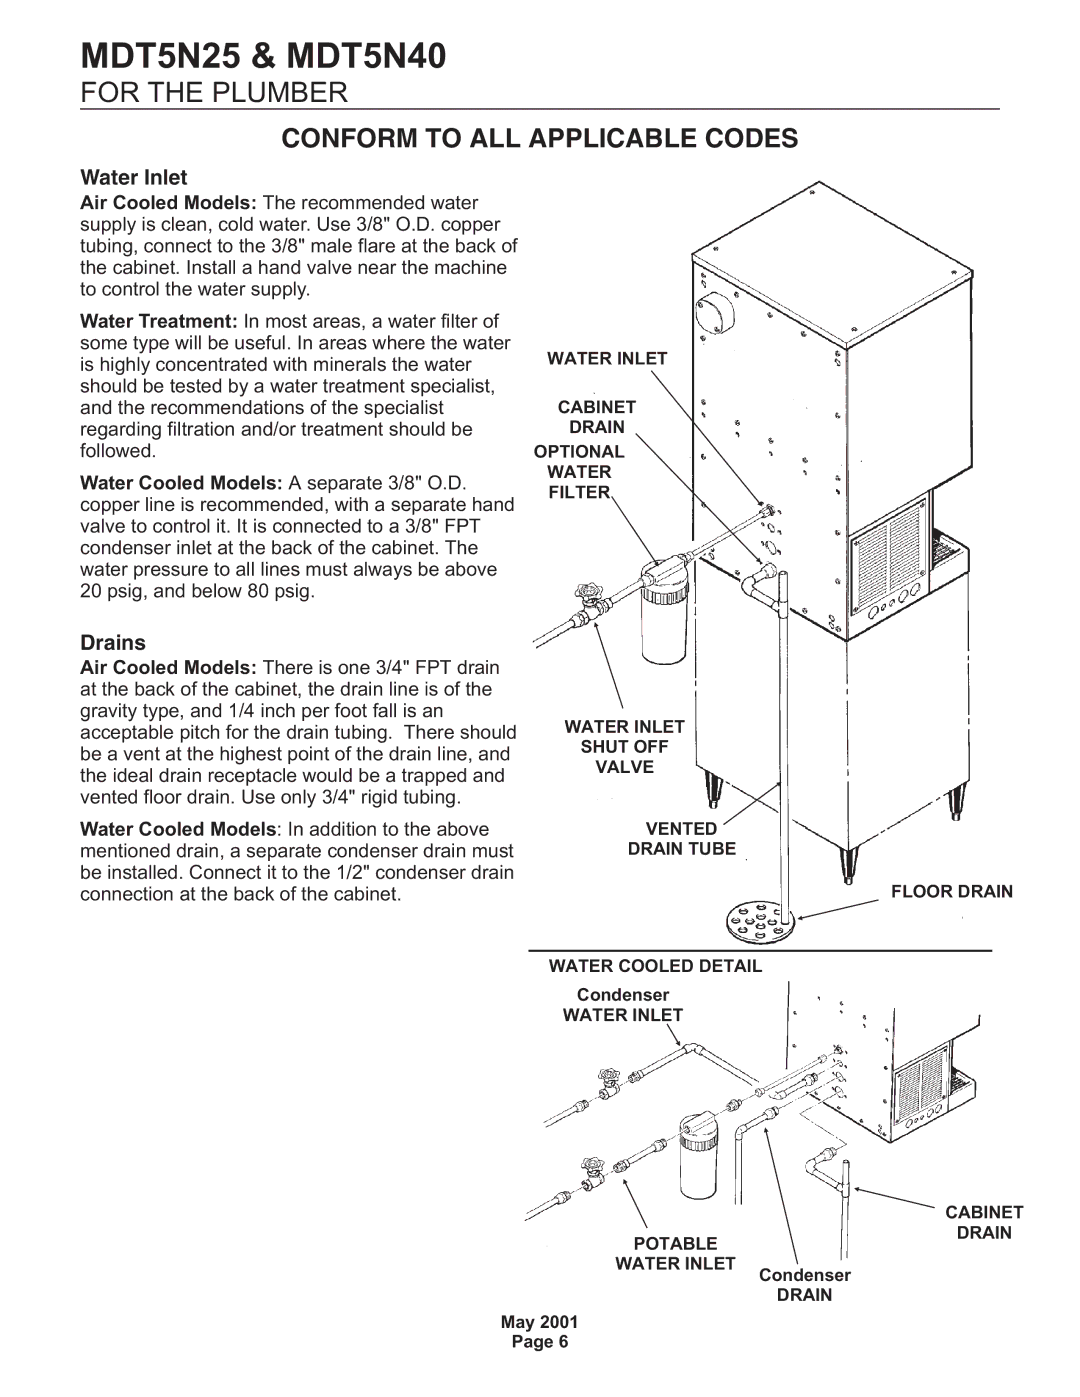 Scotsman Ice MDT5N25, MDT5N40 service manual For the Plumber, Conform to ALL Applicable Codes 